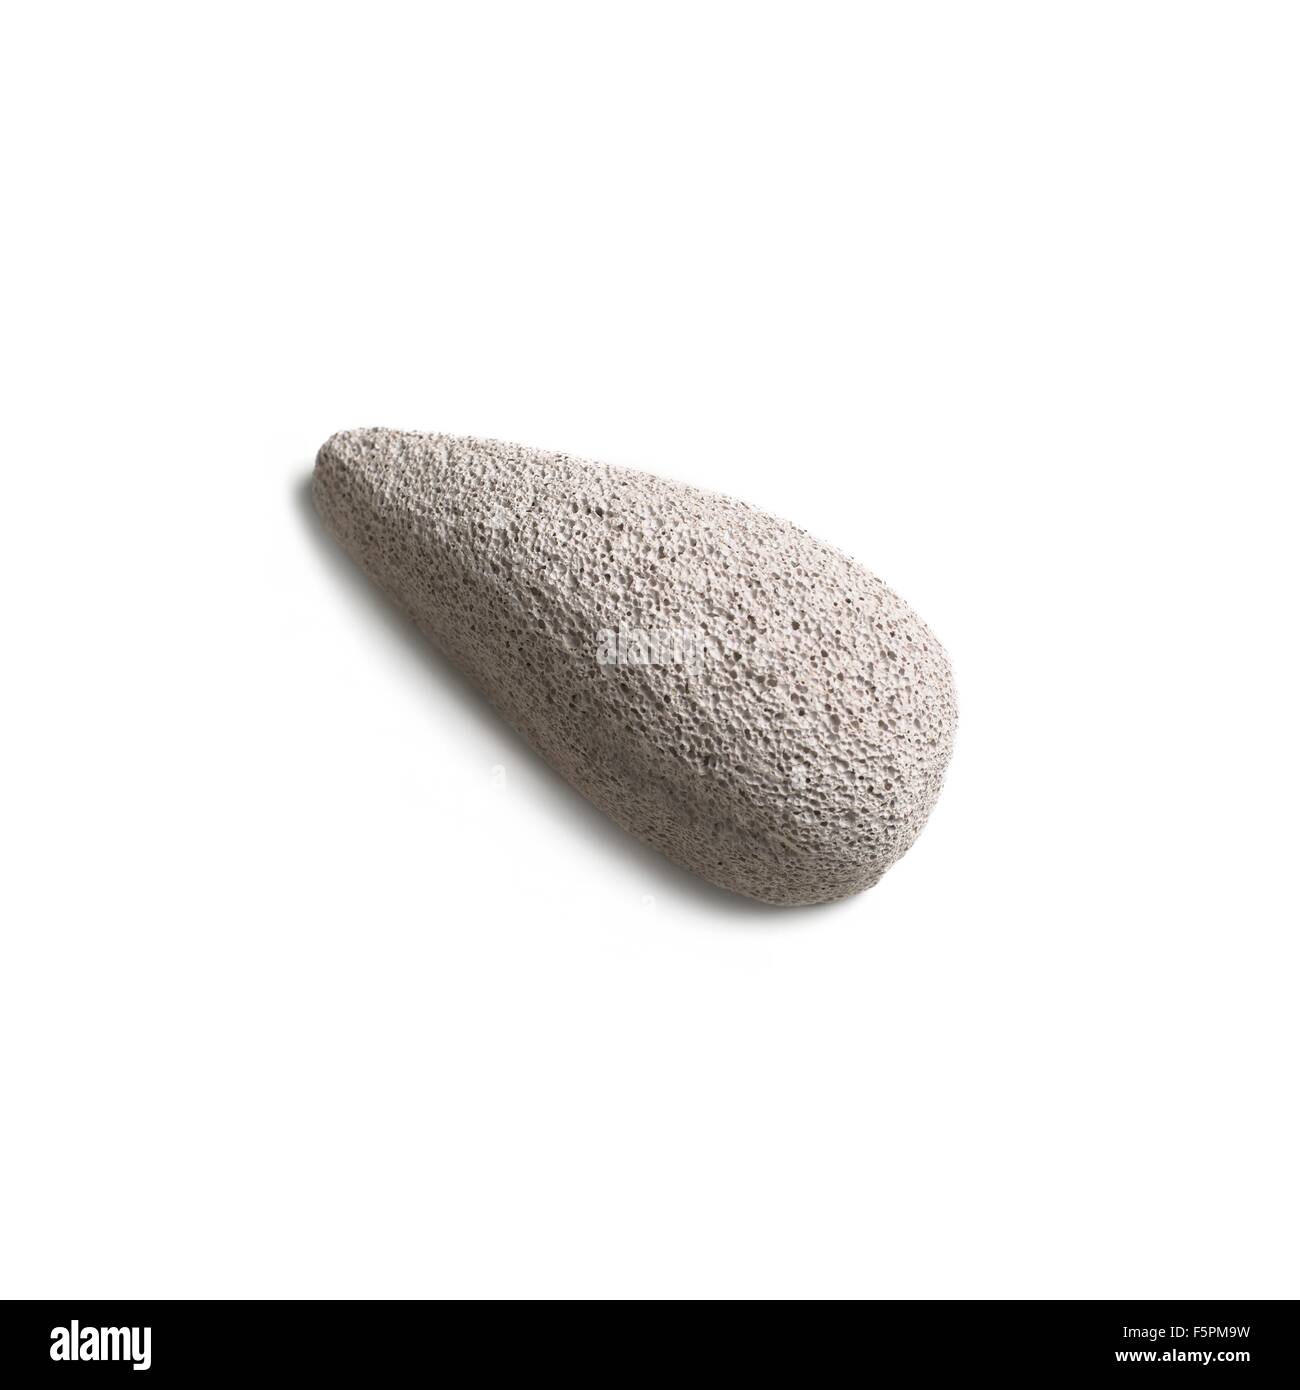 Pumice against a white background. Stock Photo